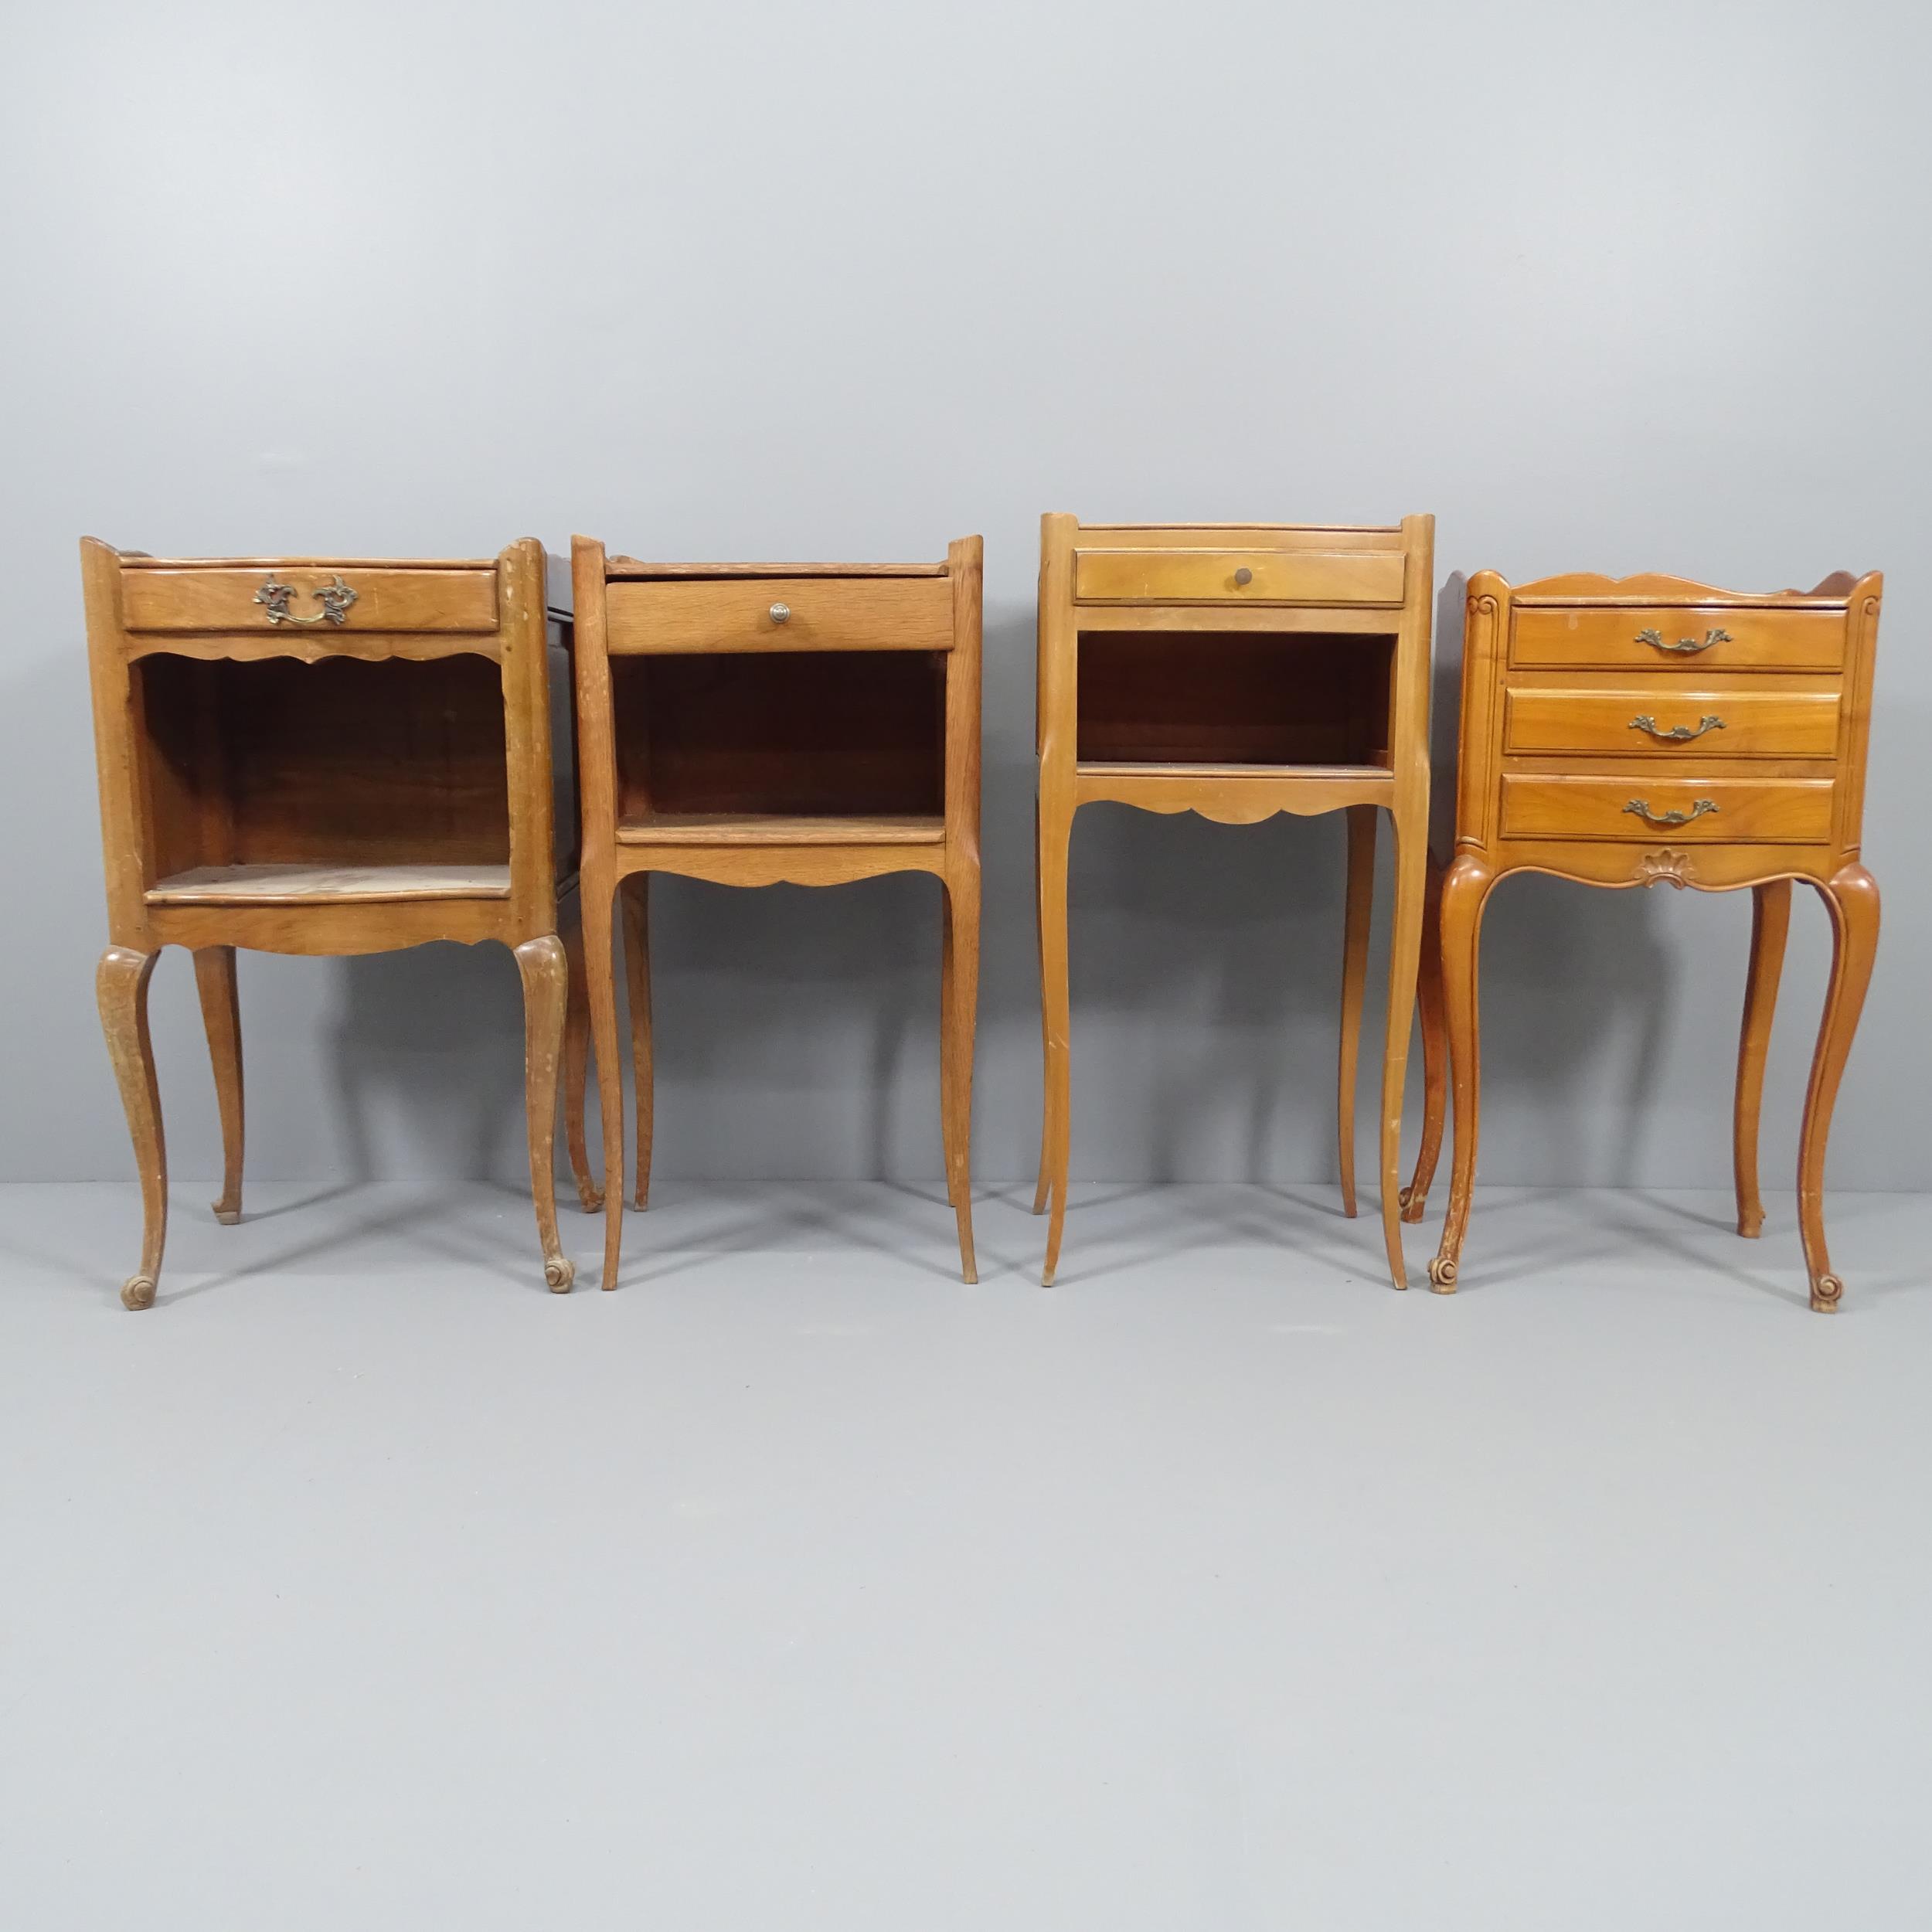 Four similar French pot cupboards. Tallest 37x76x32cm two are oak, one walnut, one yew wood. All